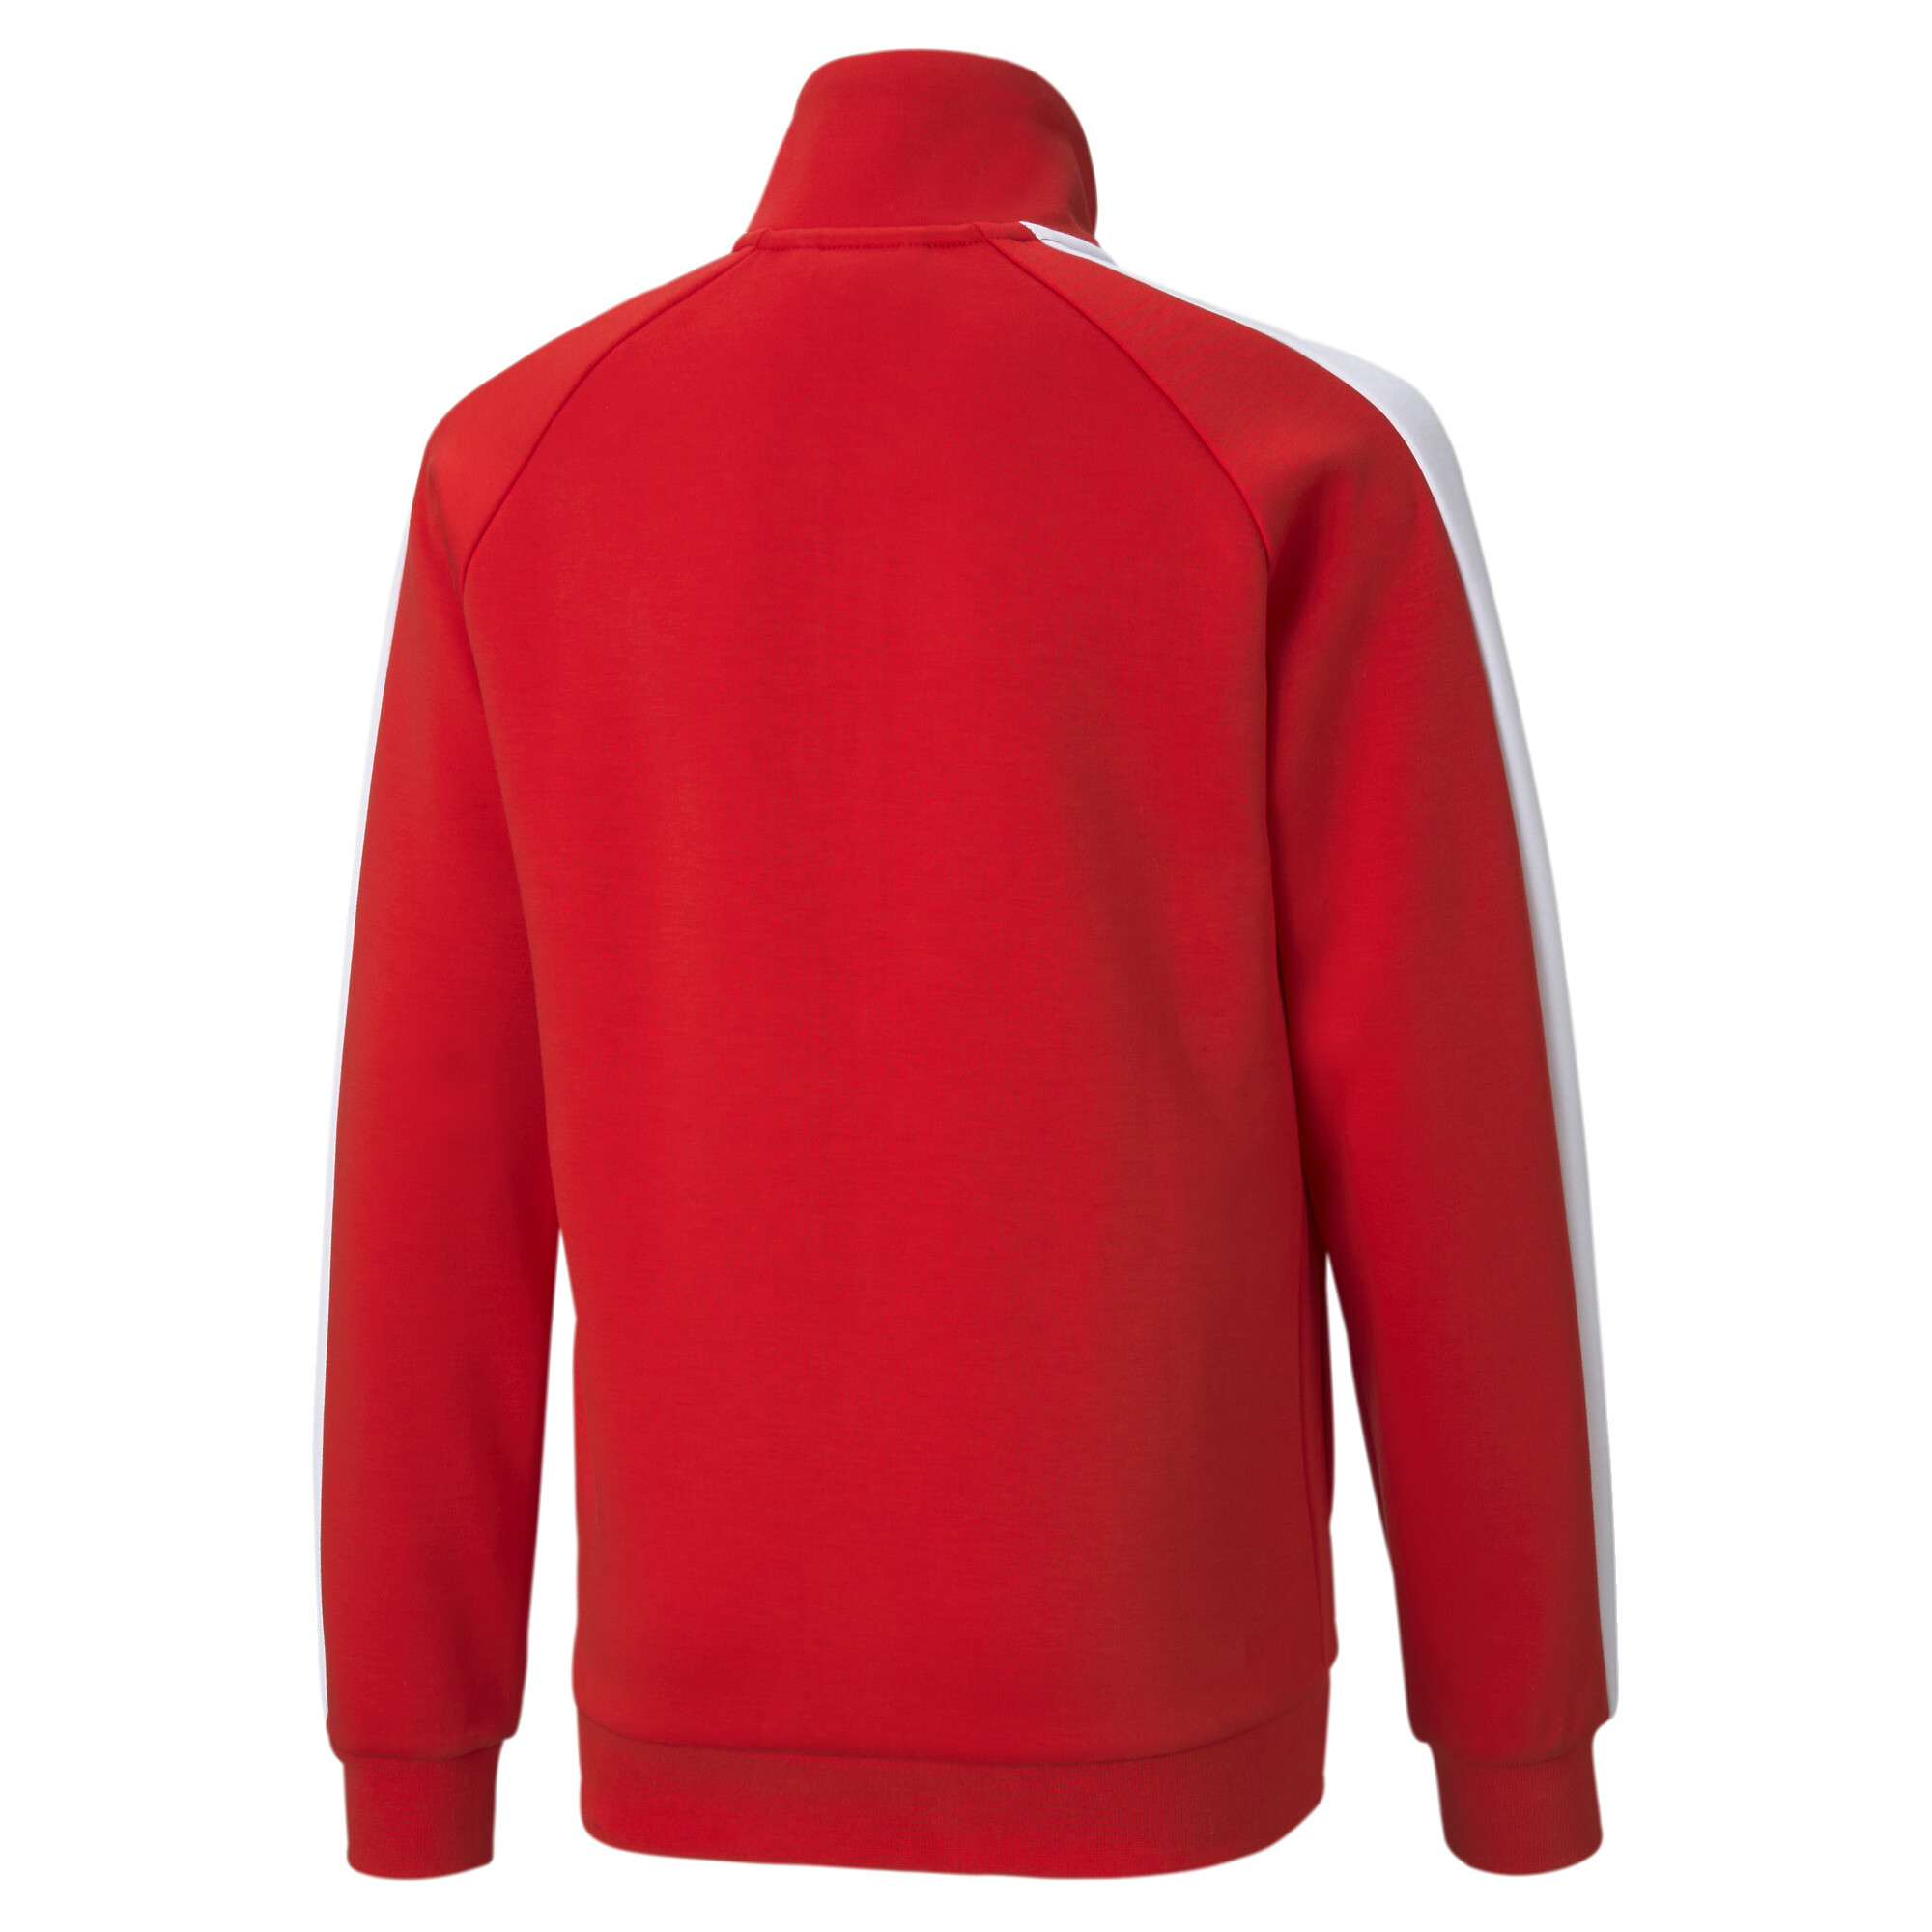 PUMA Iconic T7 Track Jacket In Red, Size 3-4 Youth